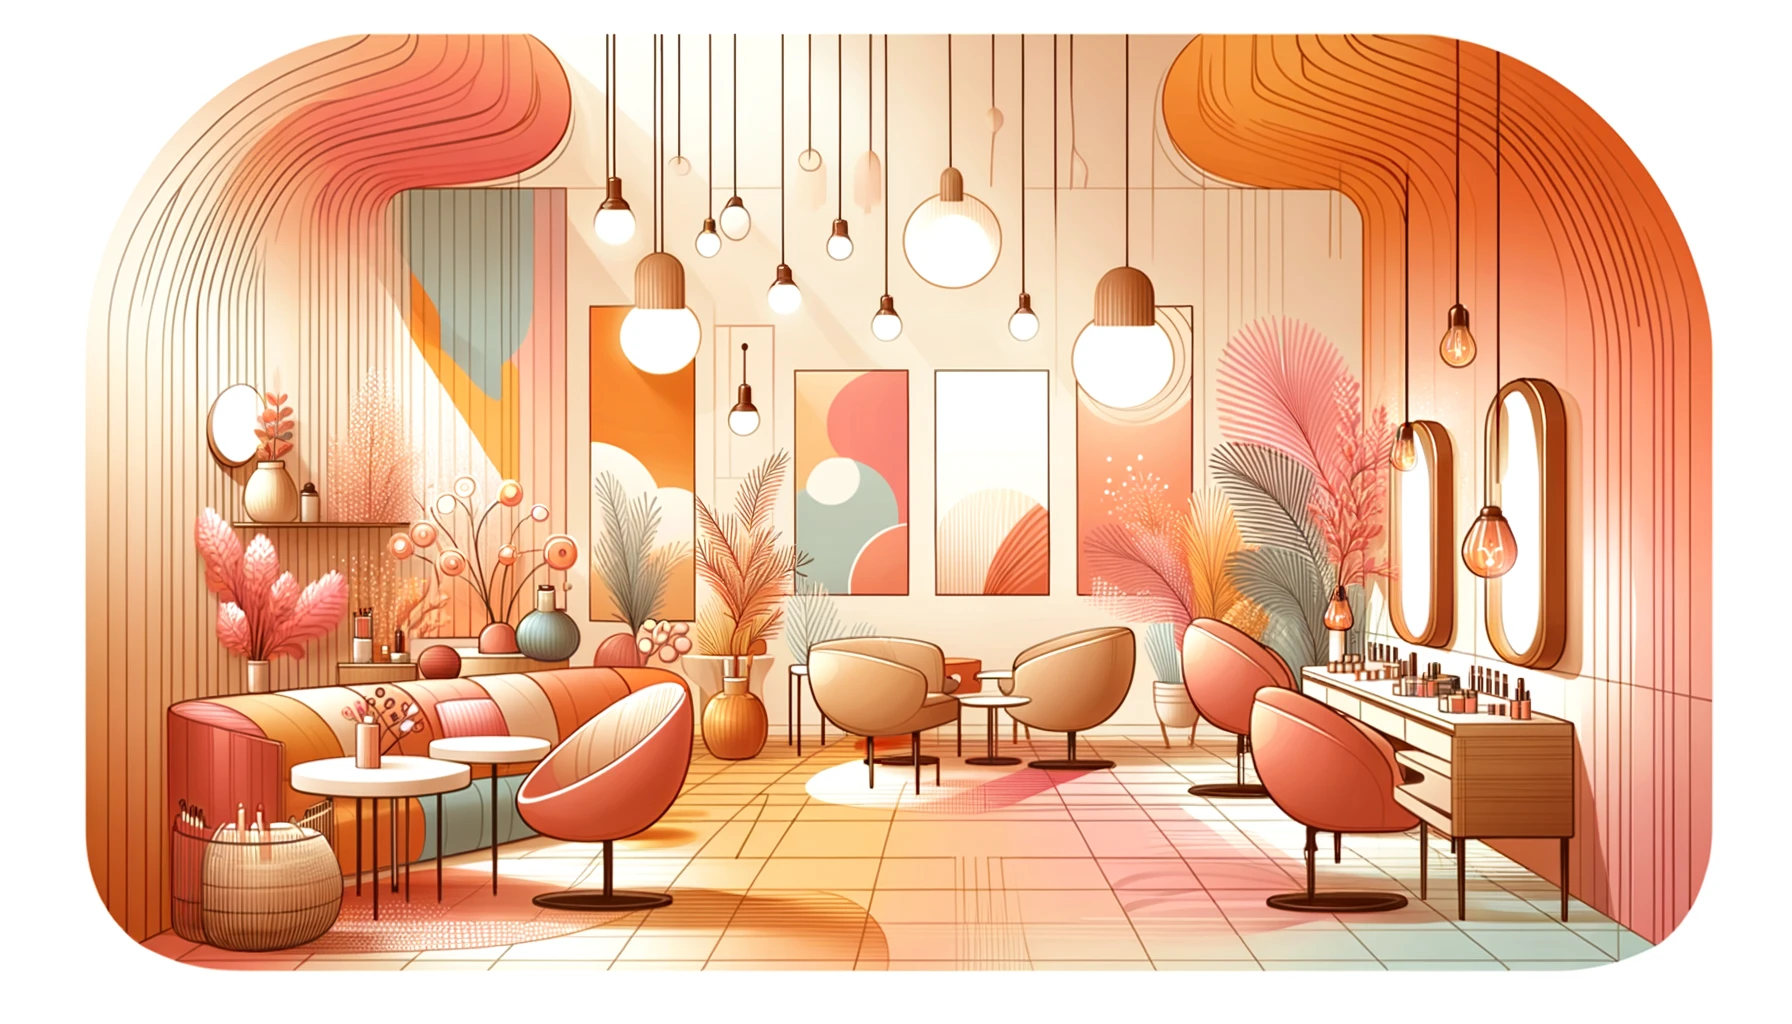 DALL·E 2024-03-25 01.49.37 - Create an illustration of a beauty salon interior with a warm color scheme, emphasizing tones like soft pinks, oranges, and yellows. The style should 